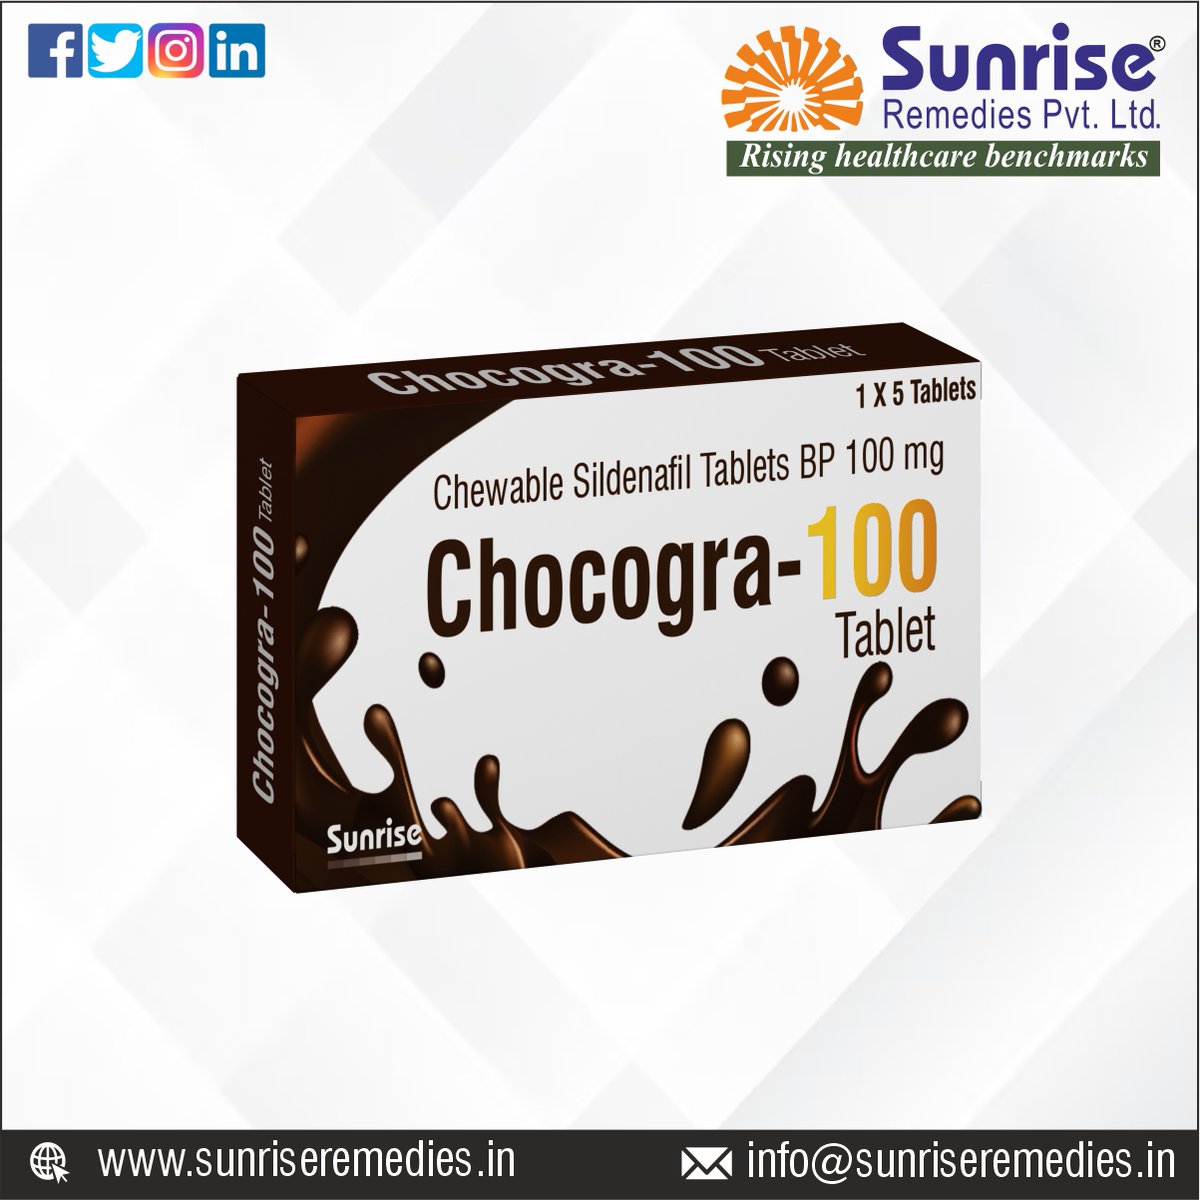 Make Your Love Marking Life Happier with #ChocograChewable Generic Sildenafil Chewable Most Popular Products From Sunrise Remedies Pvt. Ltd.

Read More: sunriseremedies.in/our-products/c…

#Malegra #SildenafilChewable #TadalafilChewable #Dapoxetine #Vardenafil #Avanafil #Udenafil #Sunrise